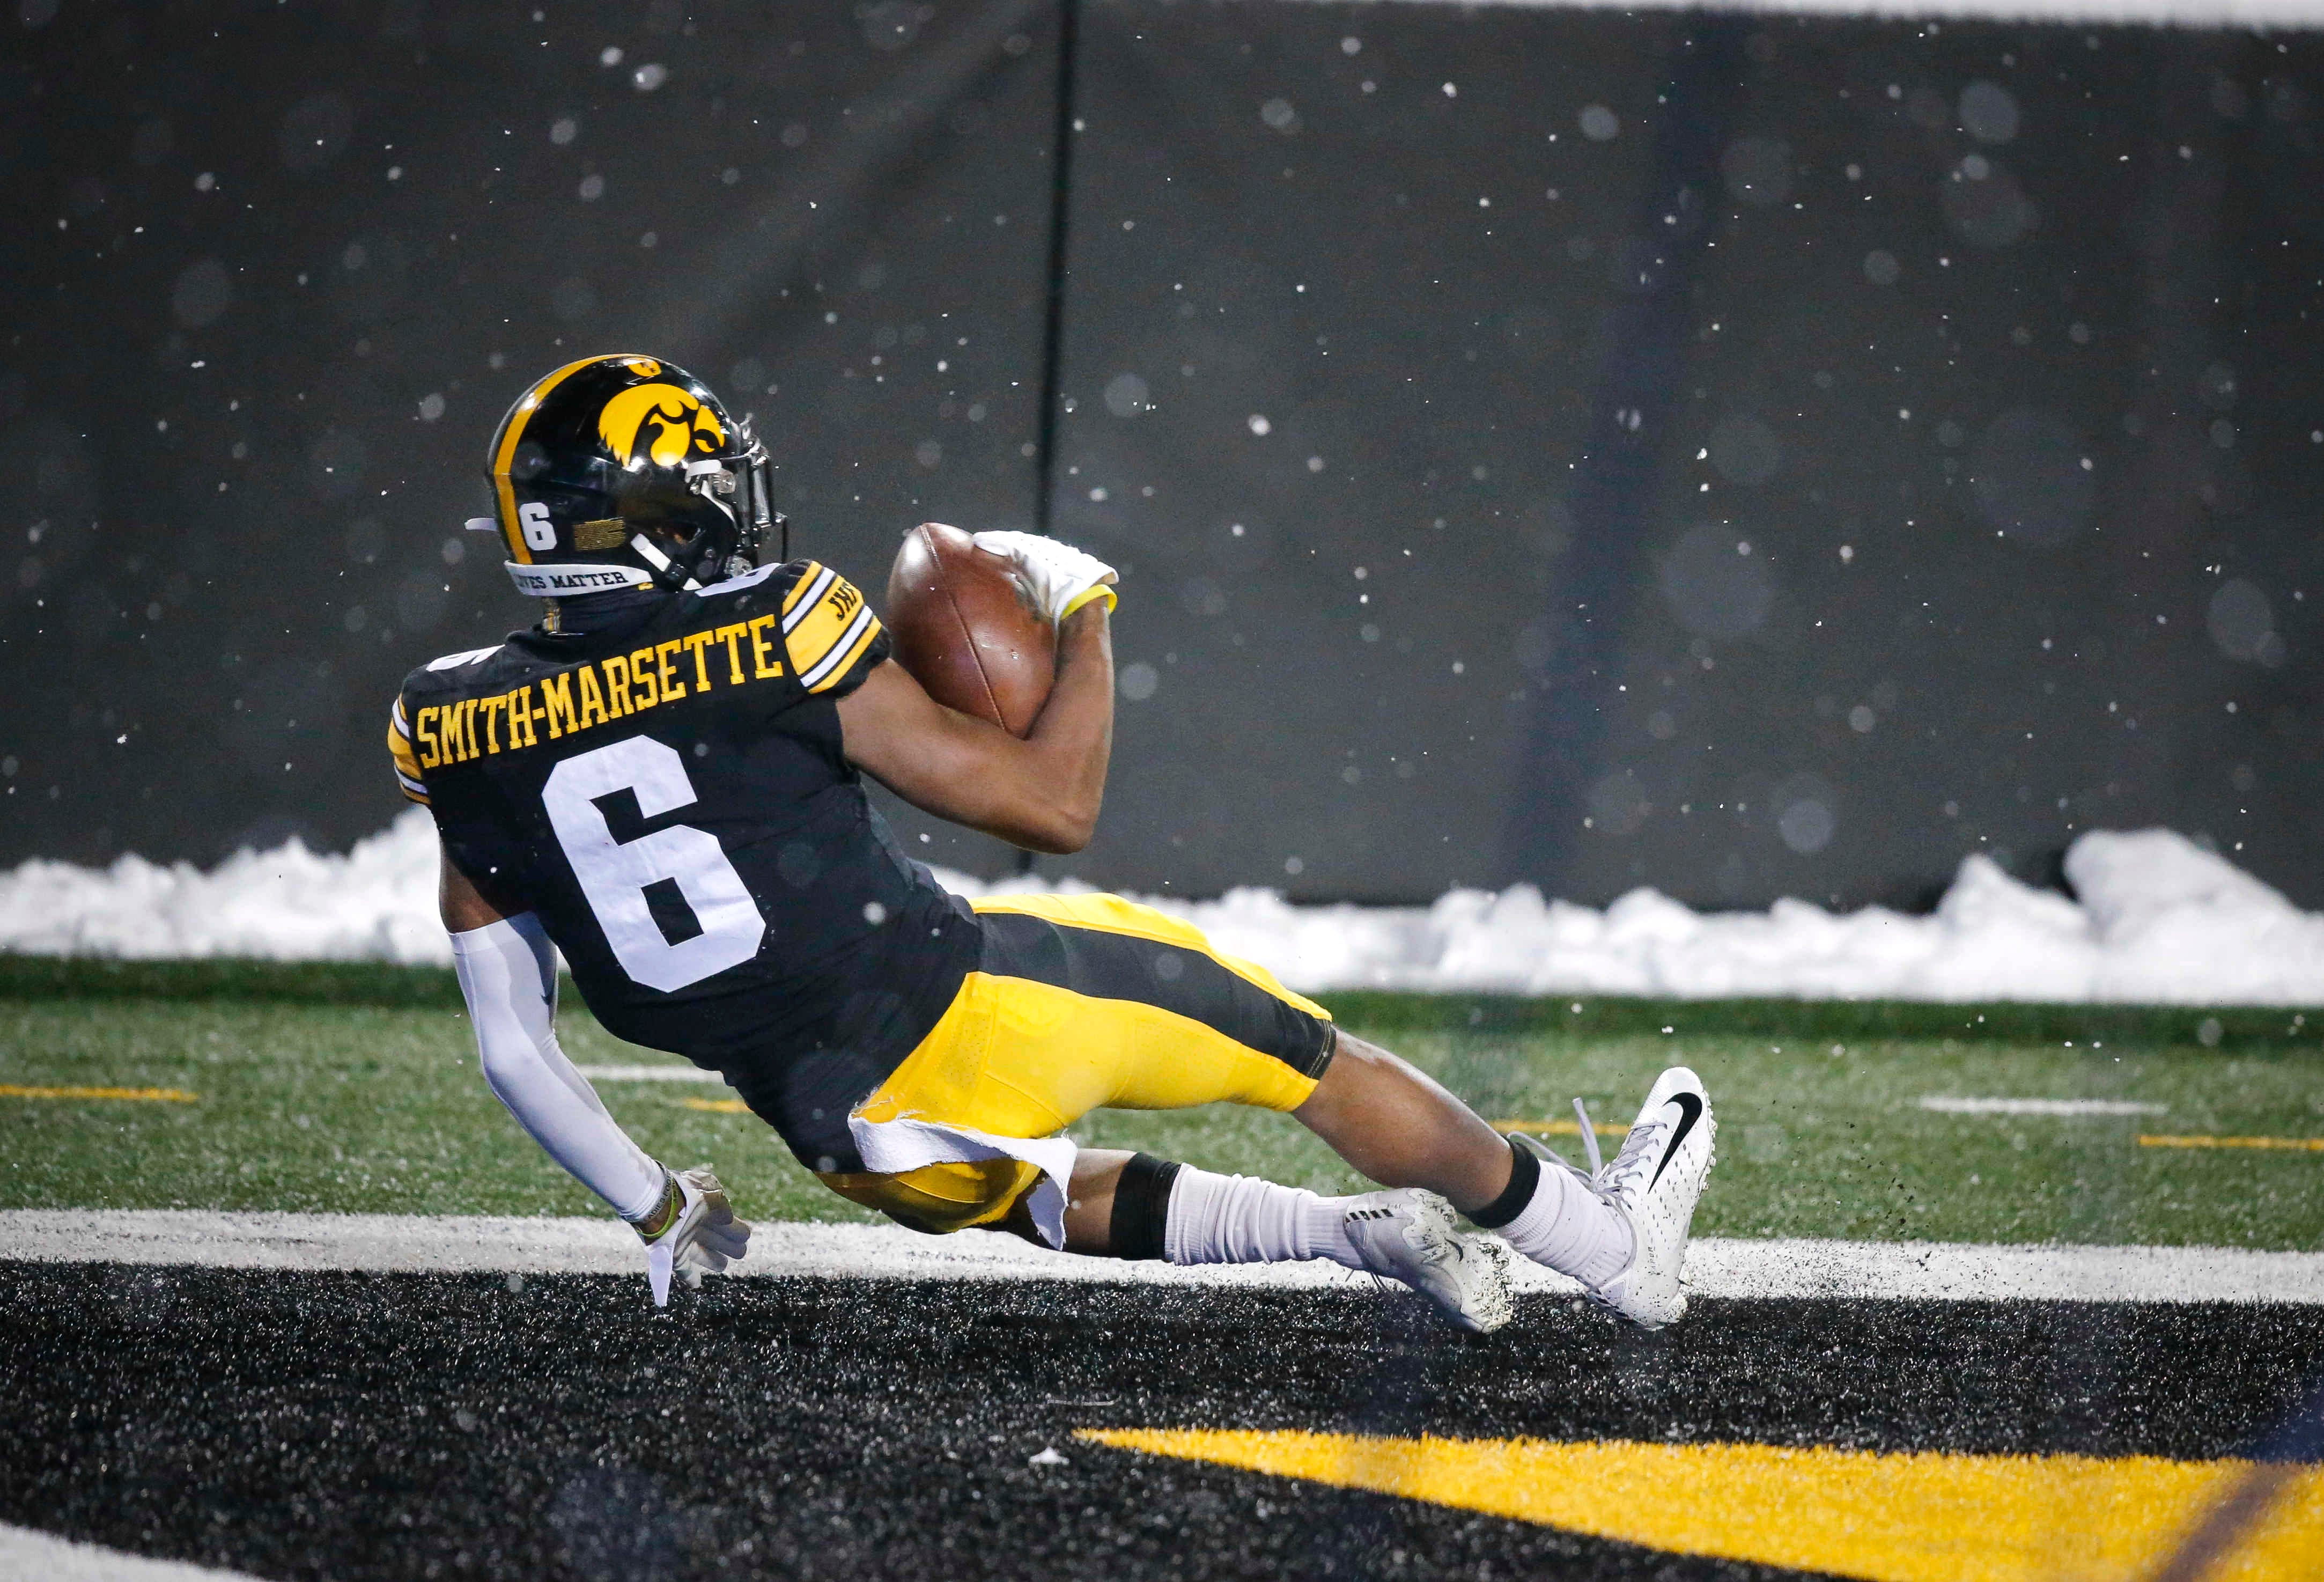 Iowa senior receiver Ihmir Smith-Marsette performs a flip after pulling down a touchdown reception in the third quarter against Wisconsin on Saturday, Dec. 12, 2020, at Kinnick Stadium in Iowa City, Iowa.